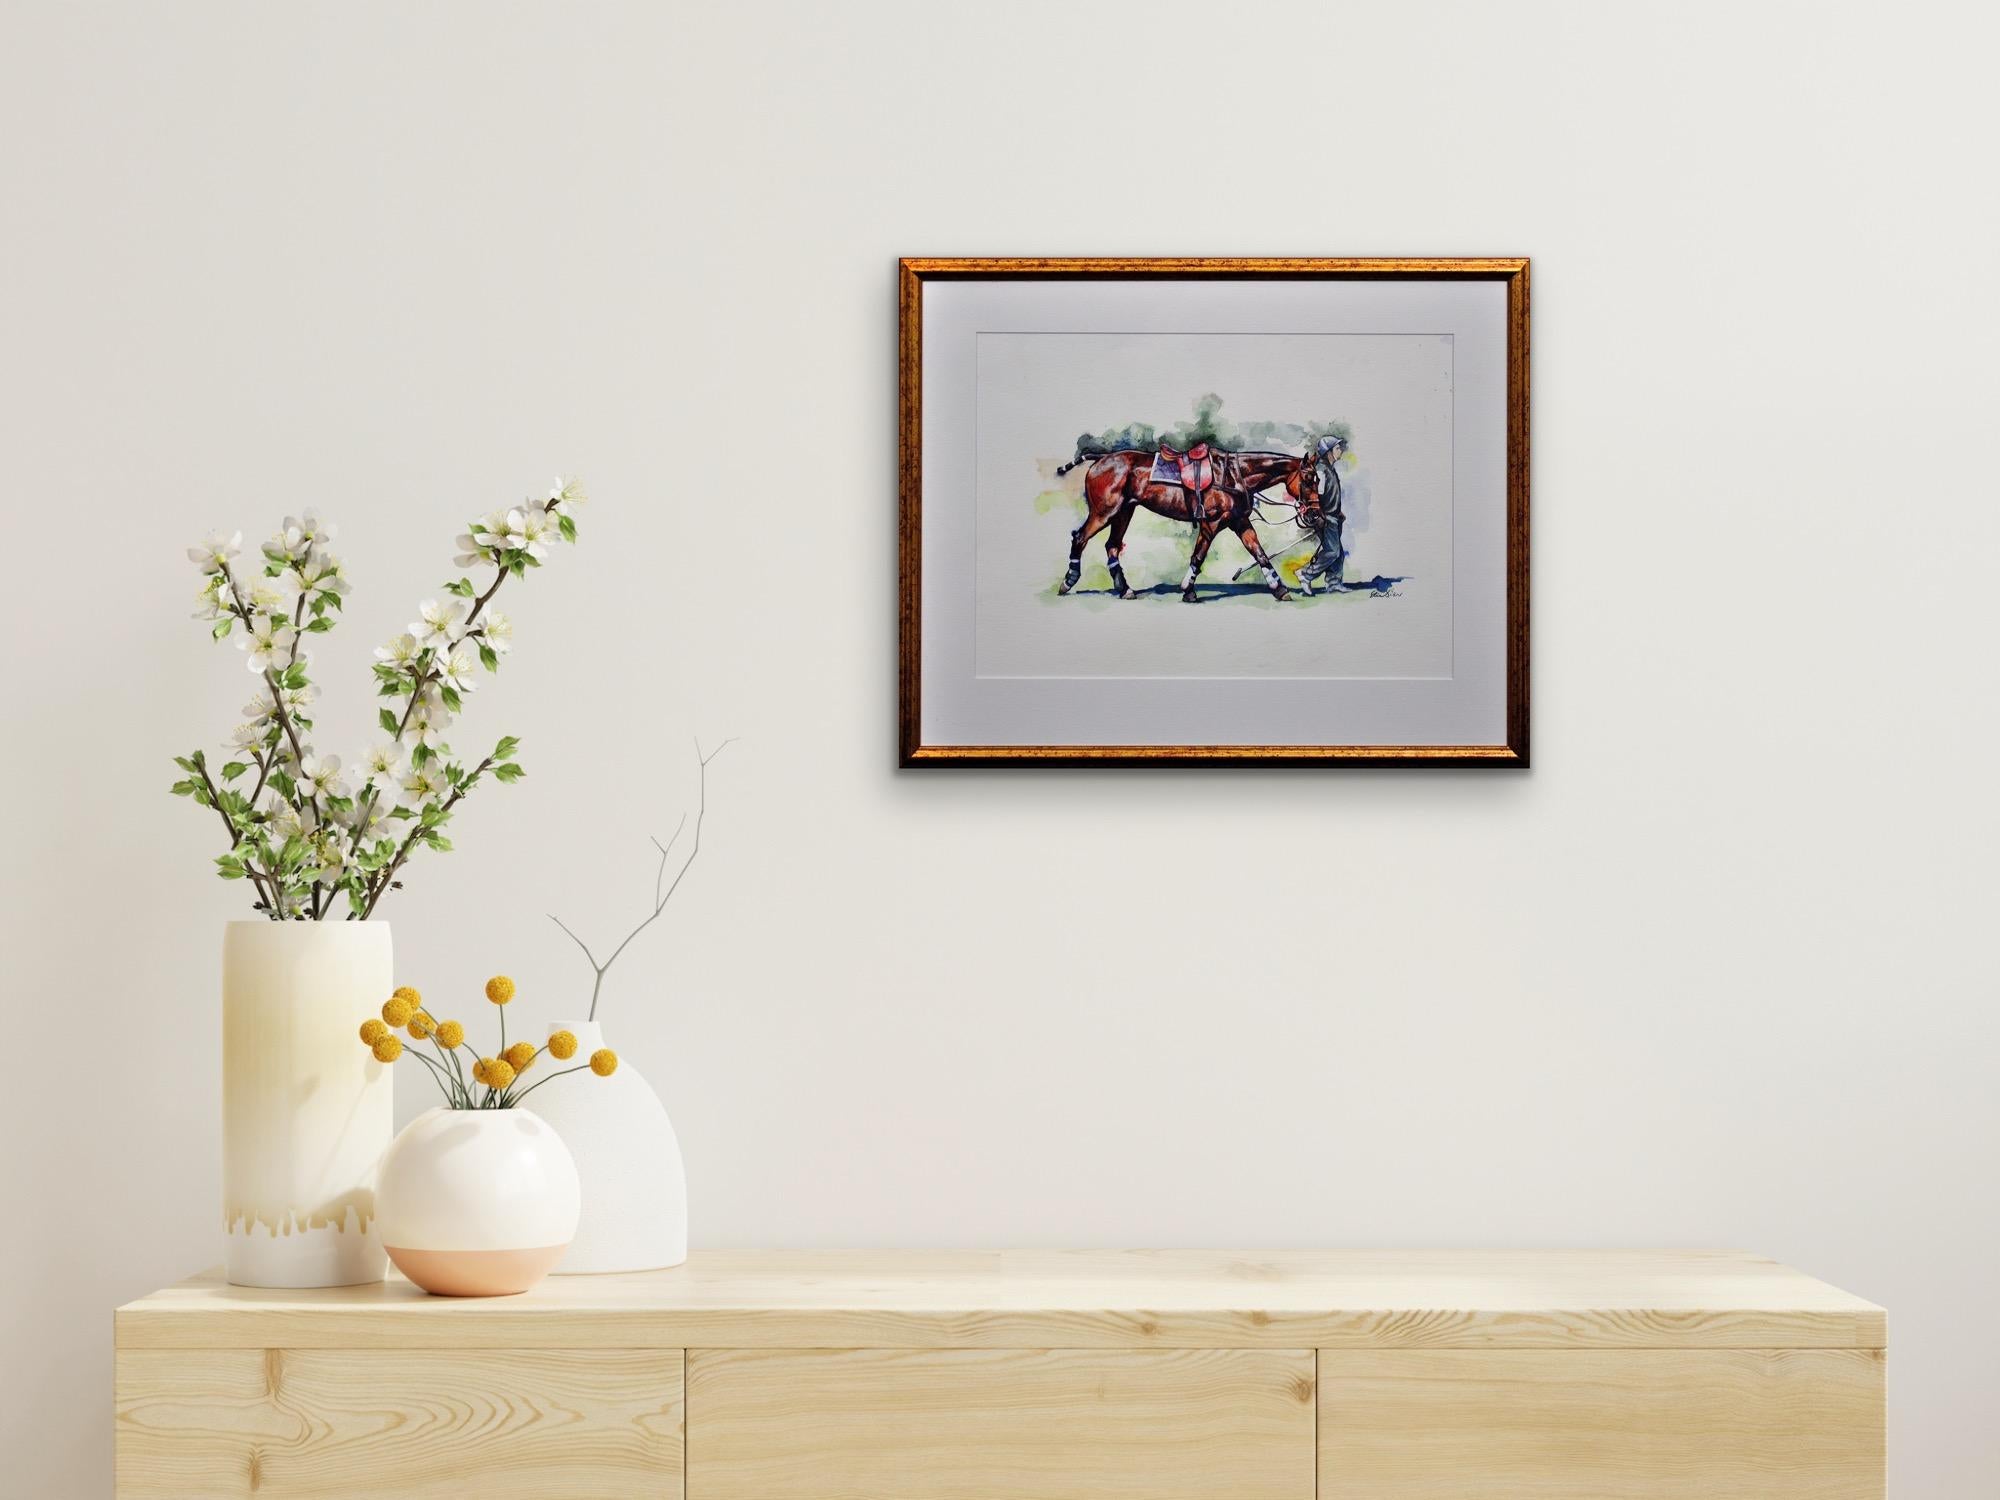 Polo Match, Cirencester, Player Leading Pony. Cotswolds. Framed Watercolor. For Sale 16